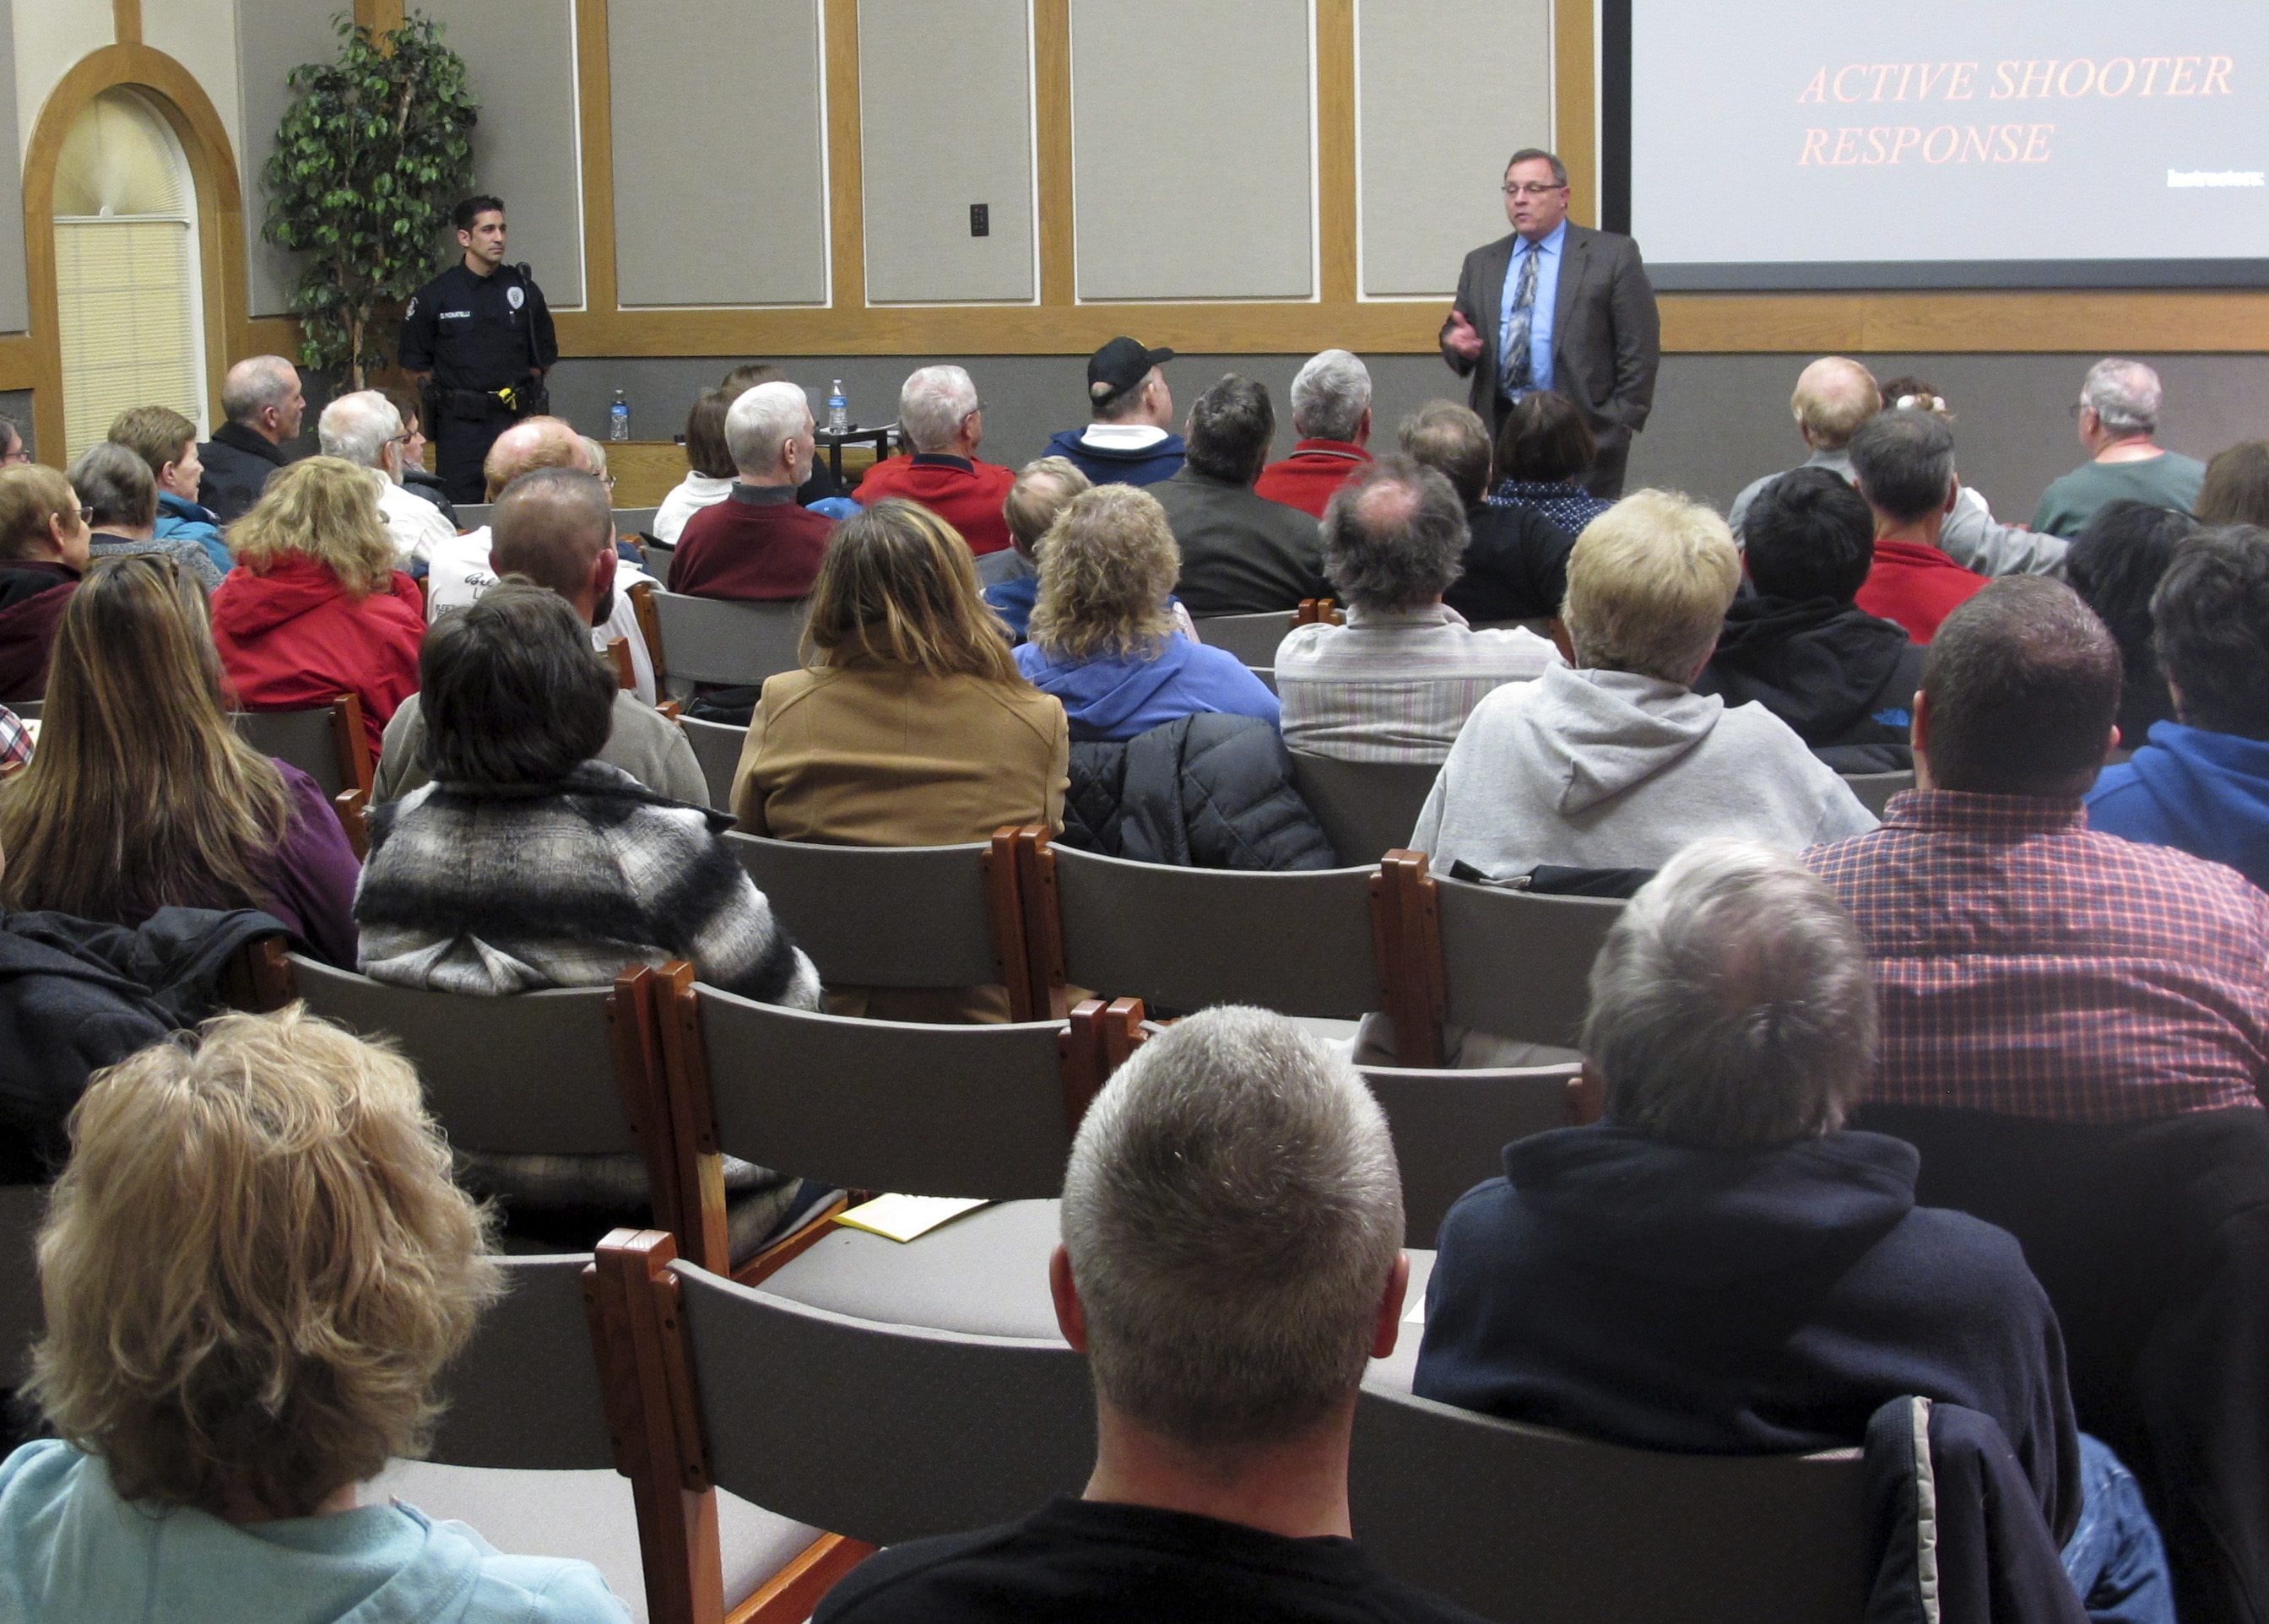 Westerville Police Chief Joe Morbitzer welcomes community members to a class about reacting to and surviving an active shooter, while speaking Jan. 28 in Westerville, Ohio.